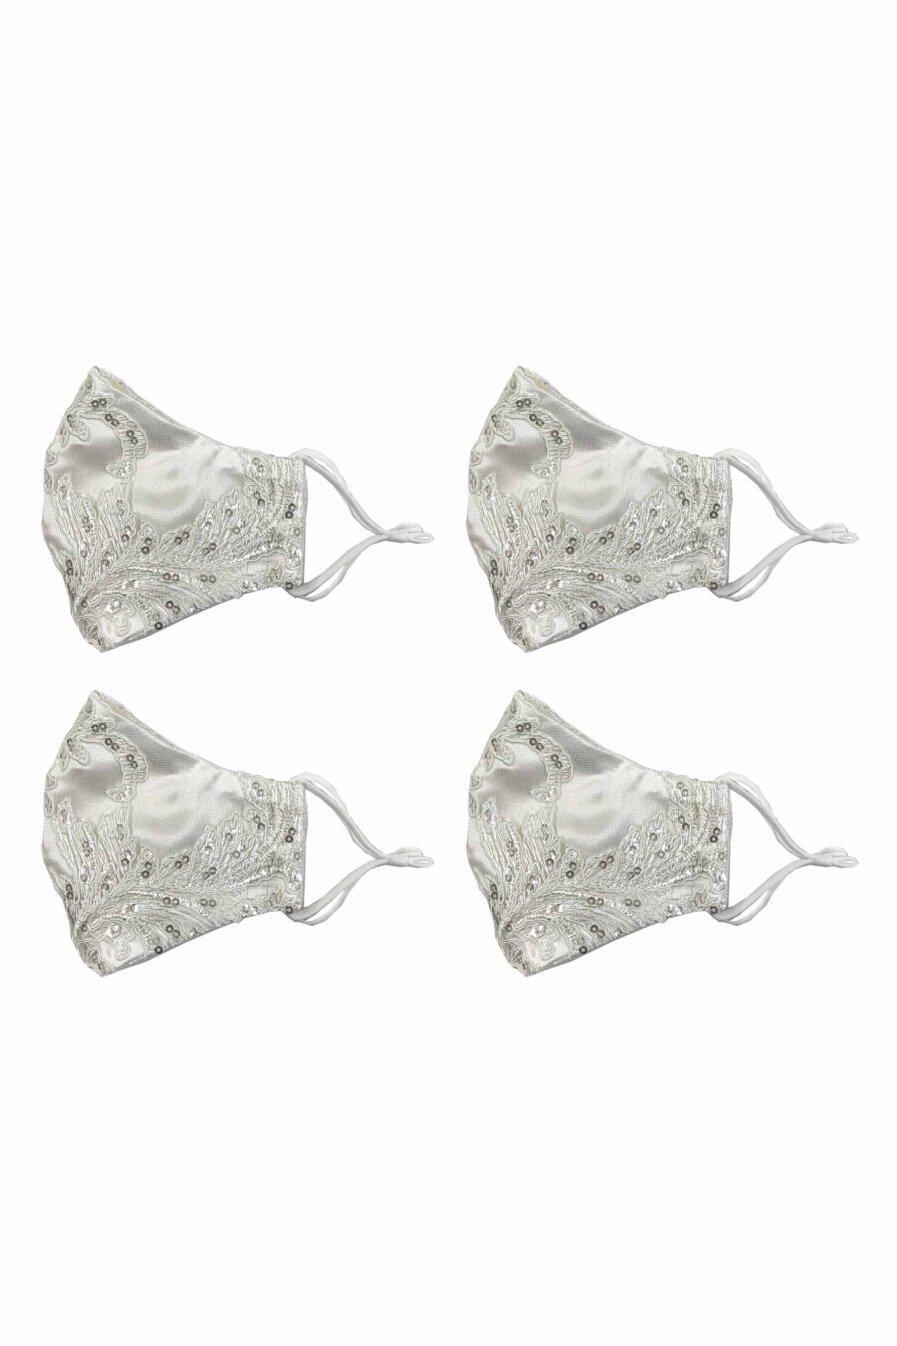 Chie Chic Posh Mask – A Set of Four (4) Silky White Masks